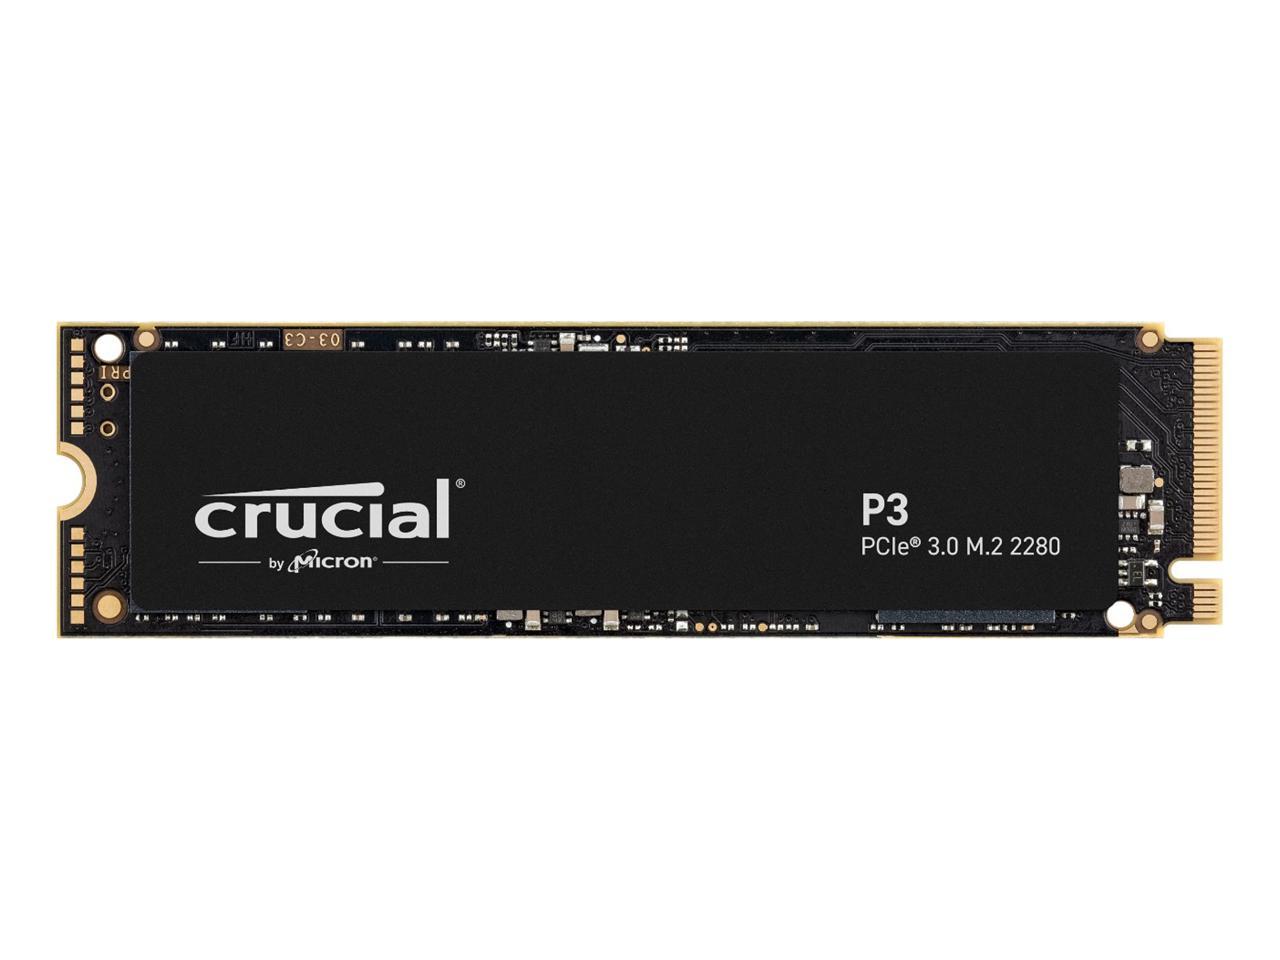 Best Price for Crucial P3 4TB NVMe SSD M.2 Drive $199.99